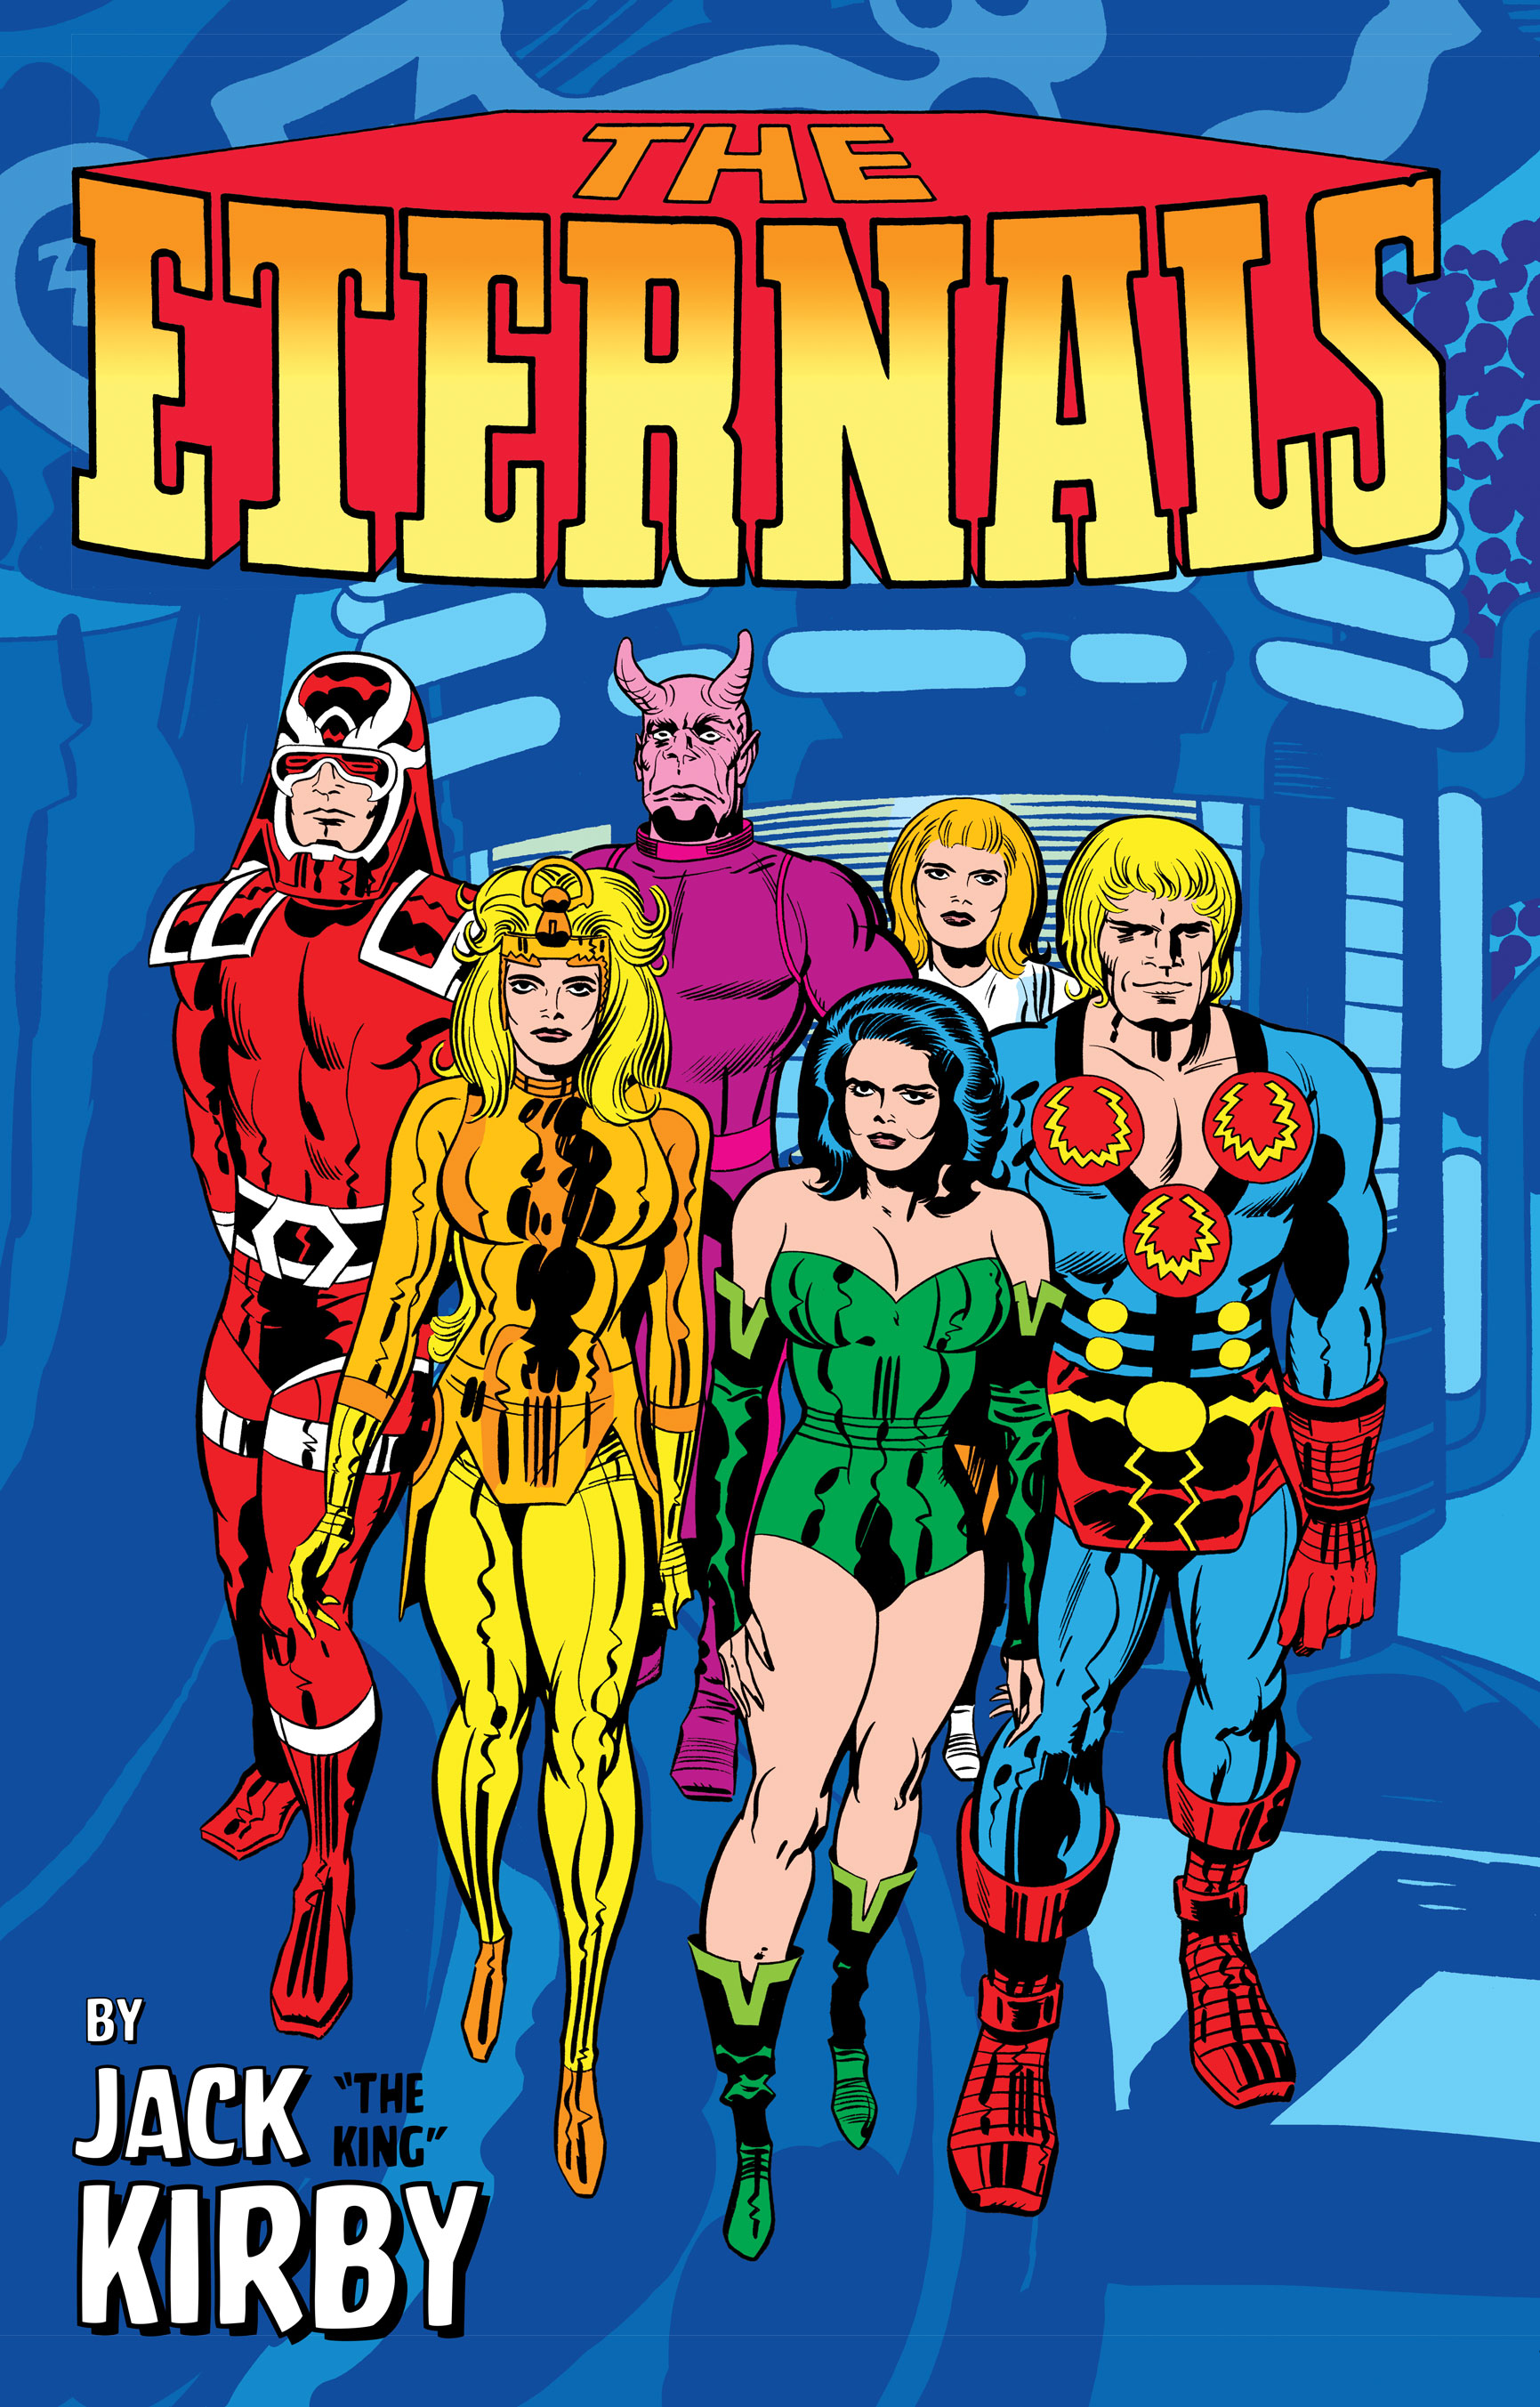 Eternals by Jack Kirby Monster-Size Hardcover